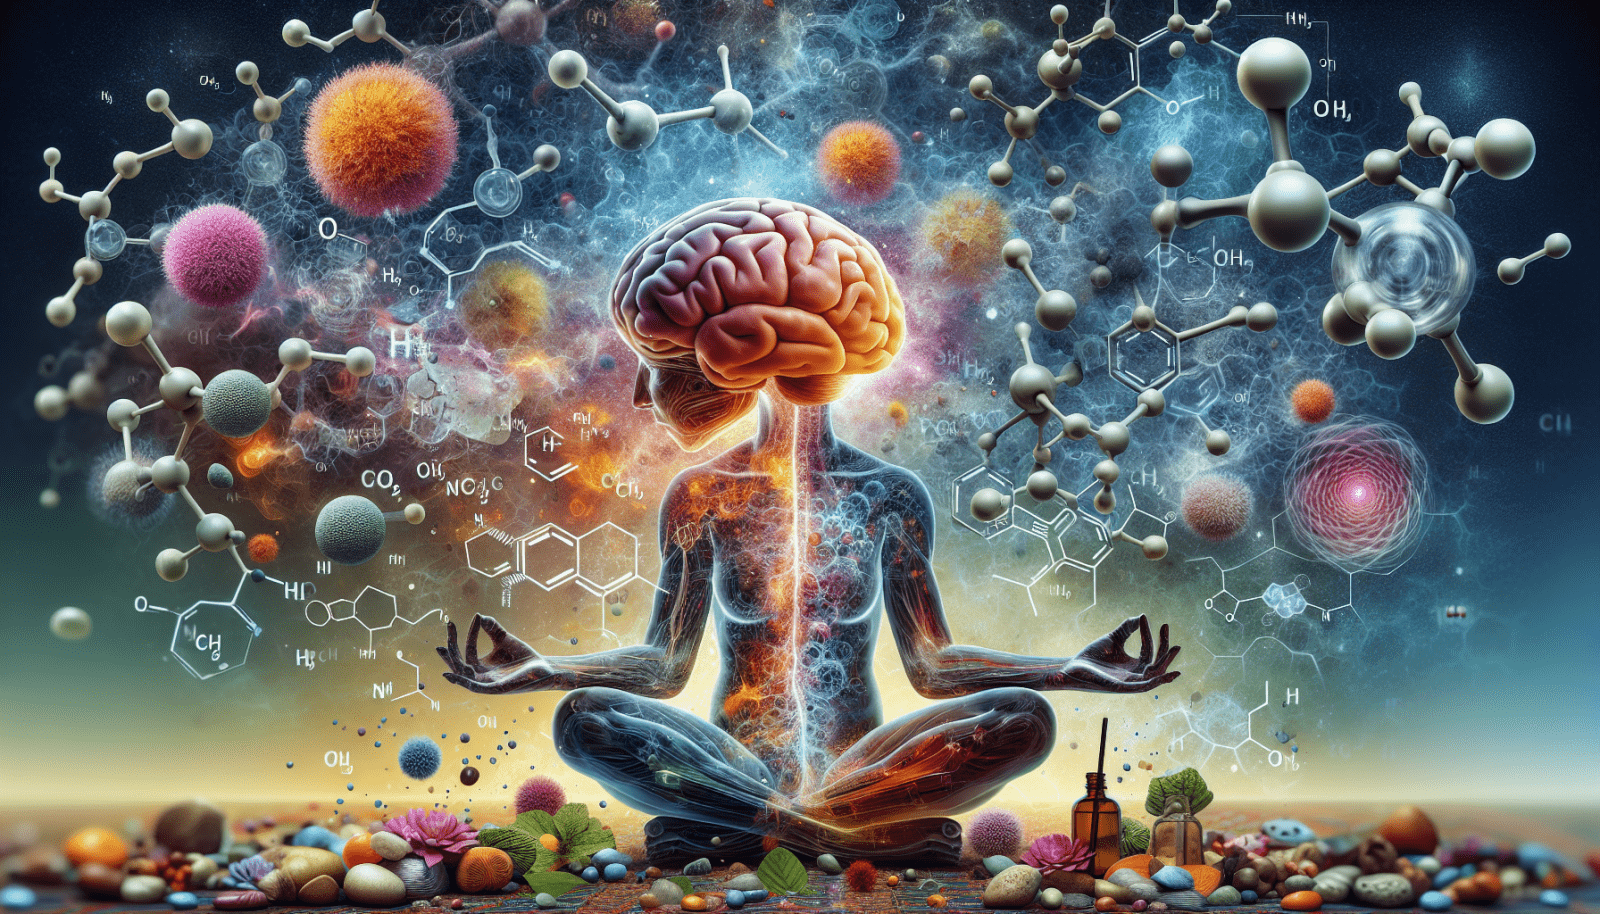 A digital artwork depicting a transparent human in a meditative pose with an oversized, visible brain, surrounded by a myriad of floating scientific elements like molecules, atomic structures, viral particles, and chemical formulas, against a cosmic backdrop.